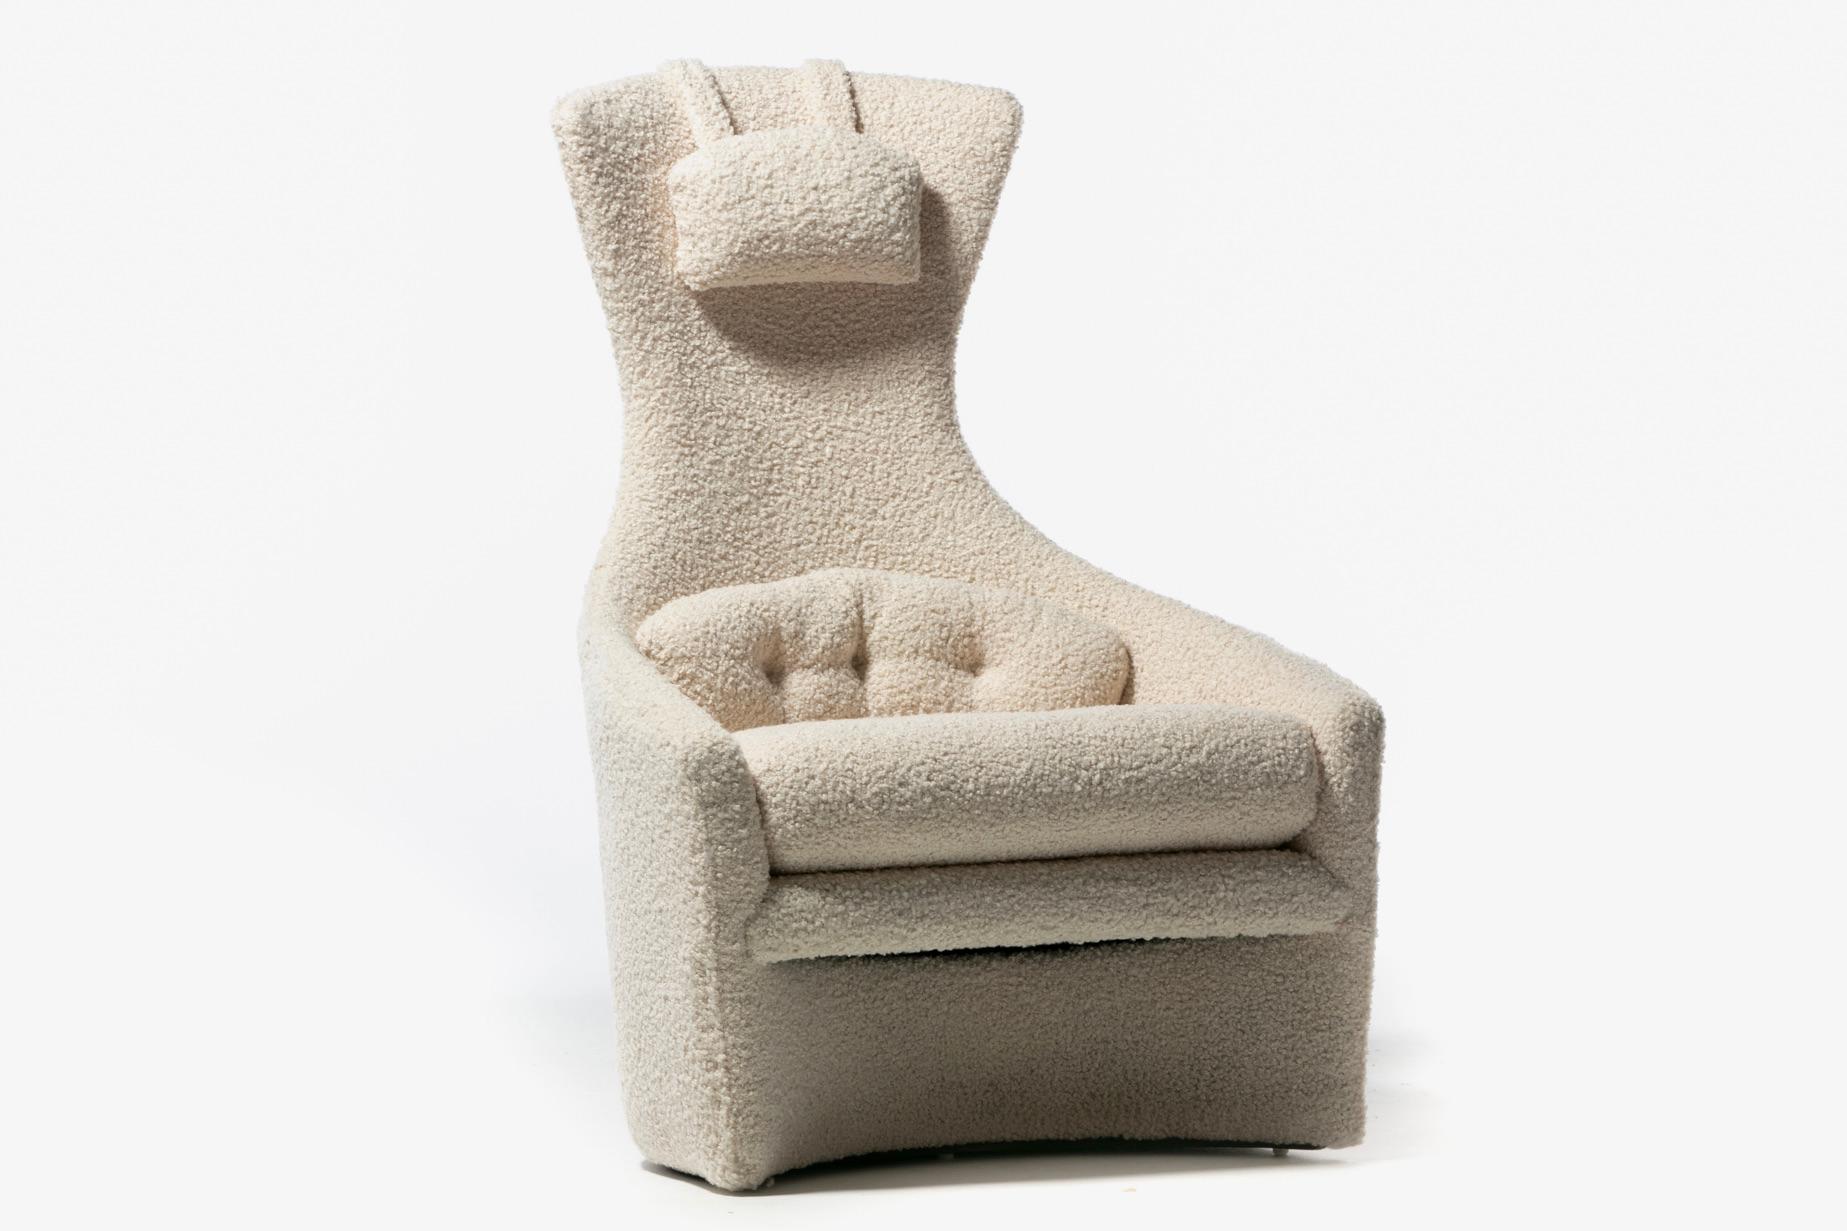 American Adrian Pearsall Sculptural Mom & Pop Lounge Chairs in Ivory Bouclé, c. 1960s For Sale